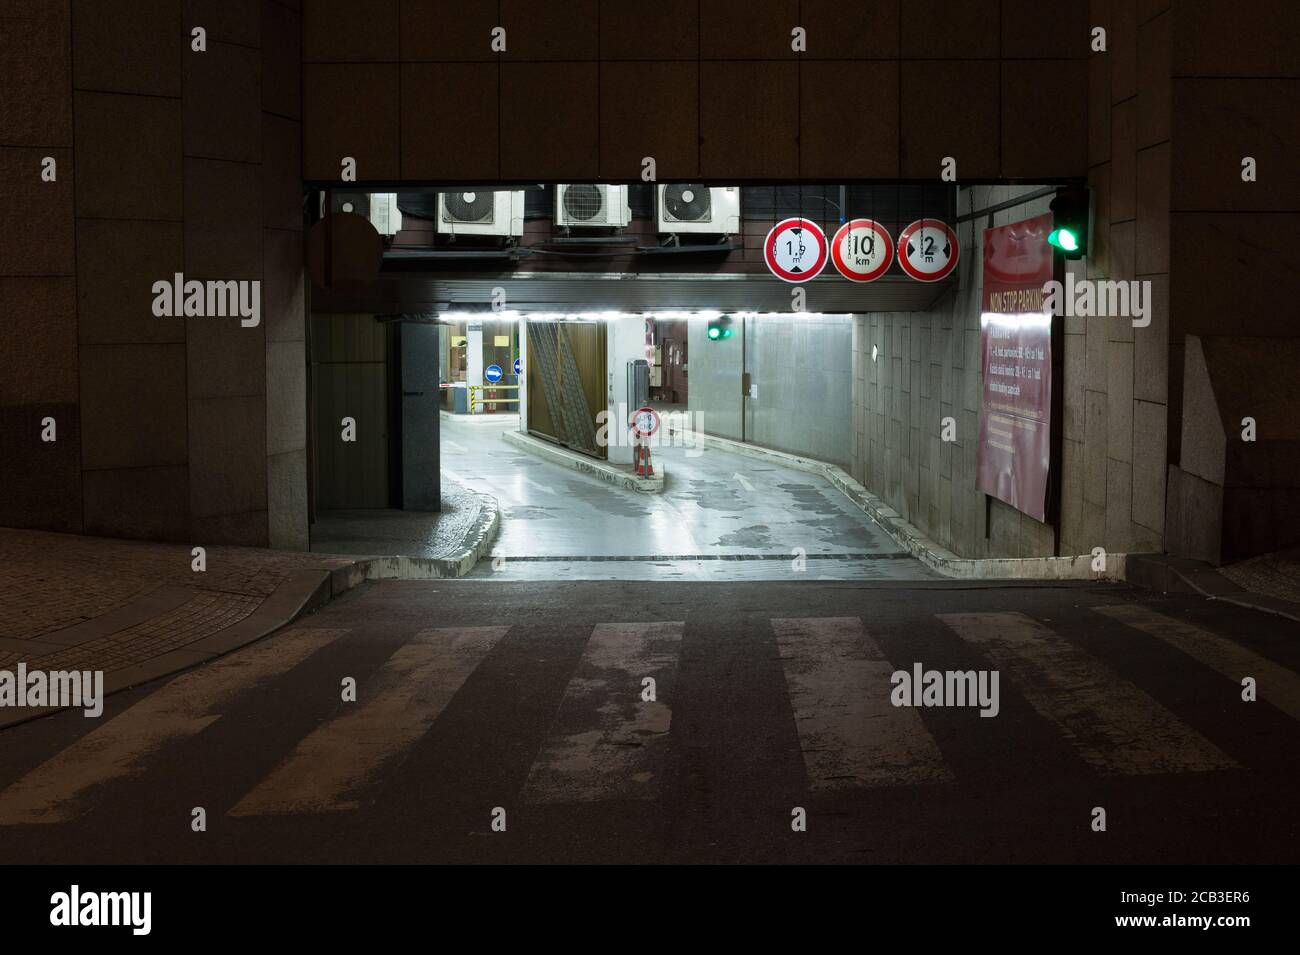 Entrance to underground car park at night. Outdoor area is dark, carpark is lit by artificial light. Stock Photo